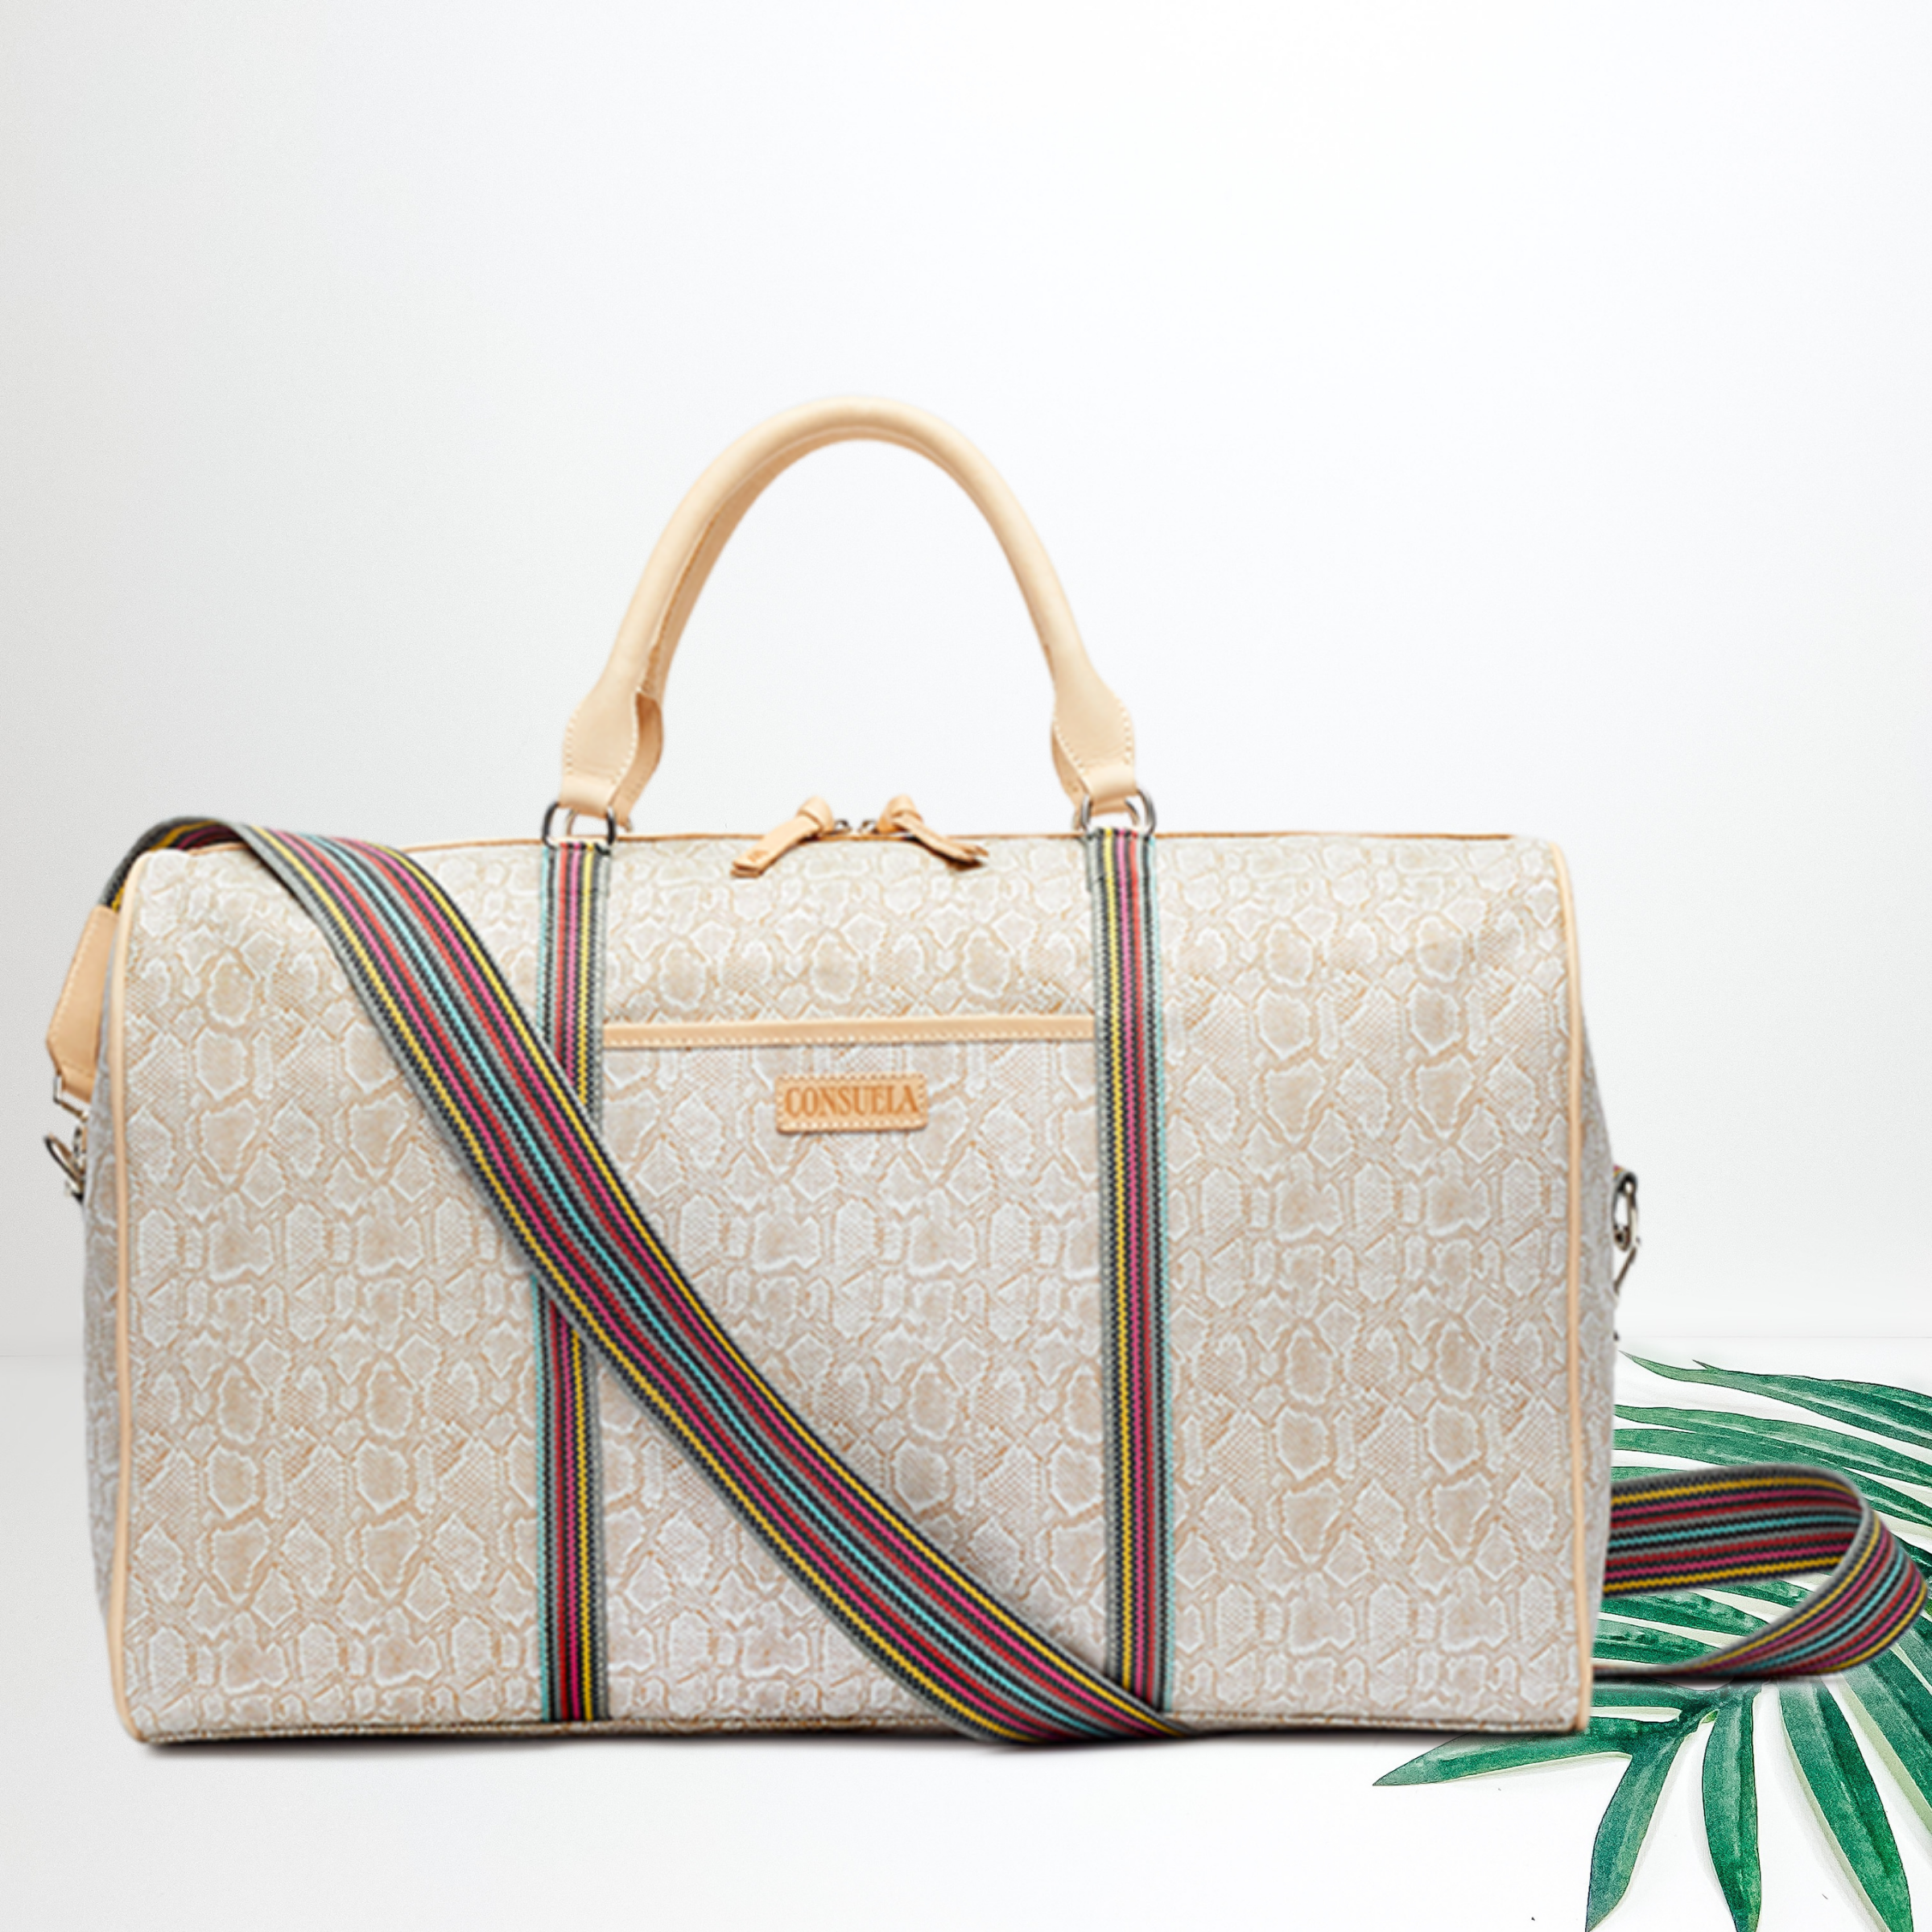 Centered in the picture is a tote bag in white snakeskin. To the right of the tote is a palm leaf, all on a white background.